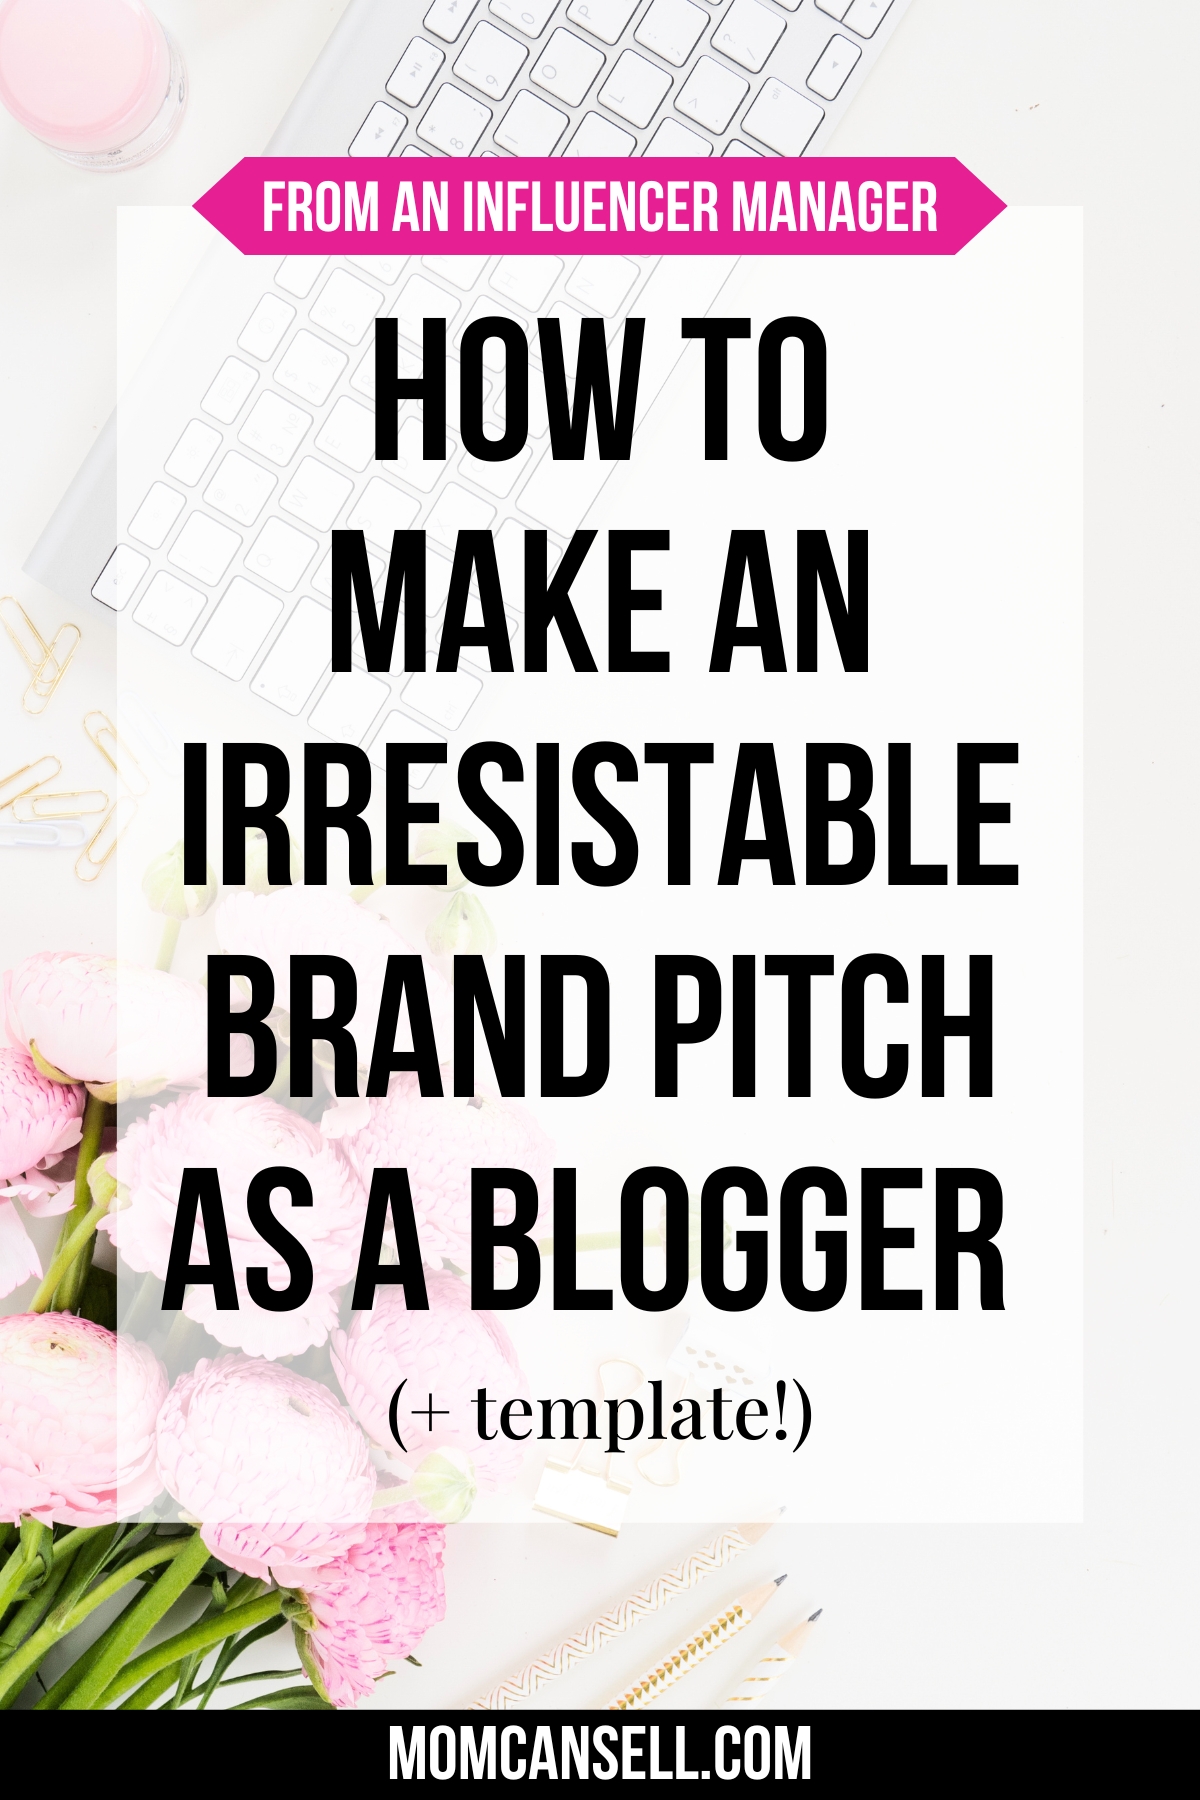 How to pitch to brands as a blogger.